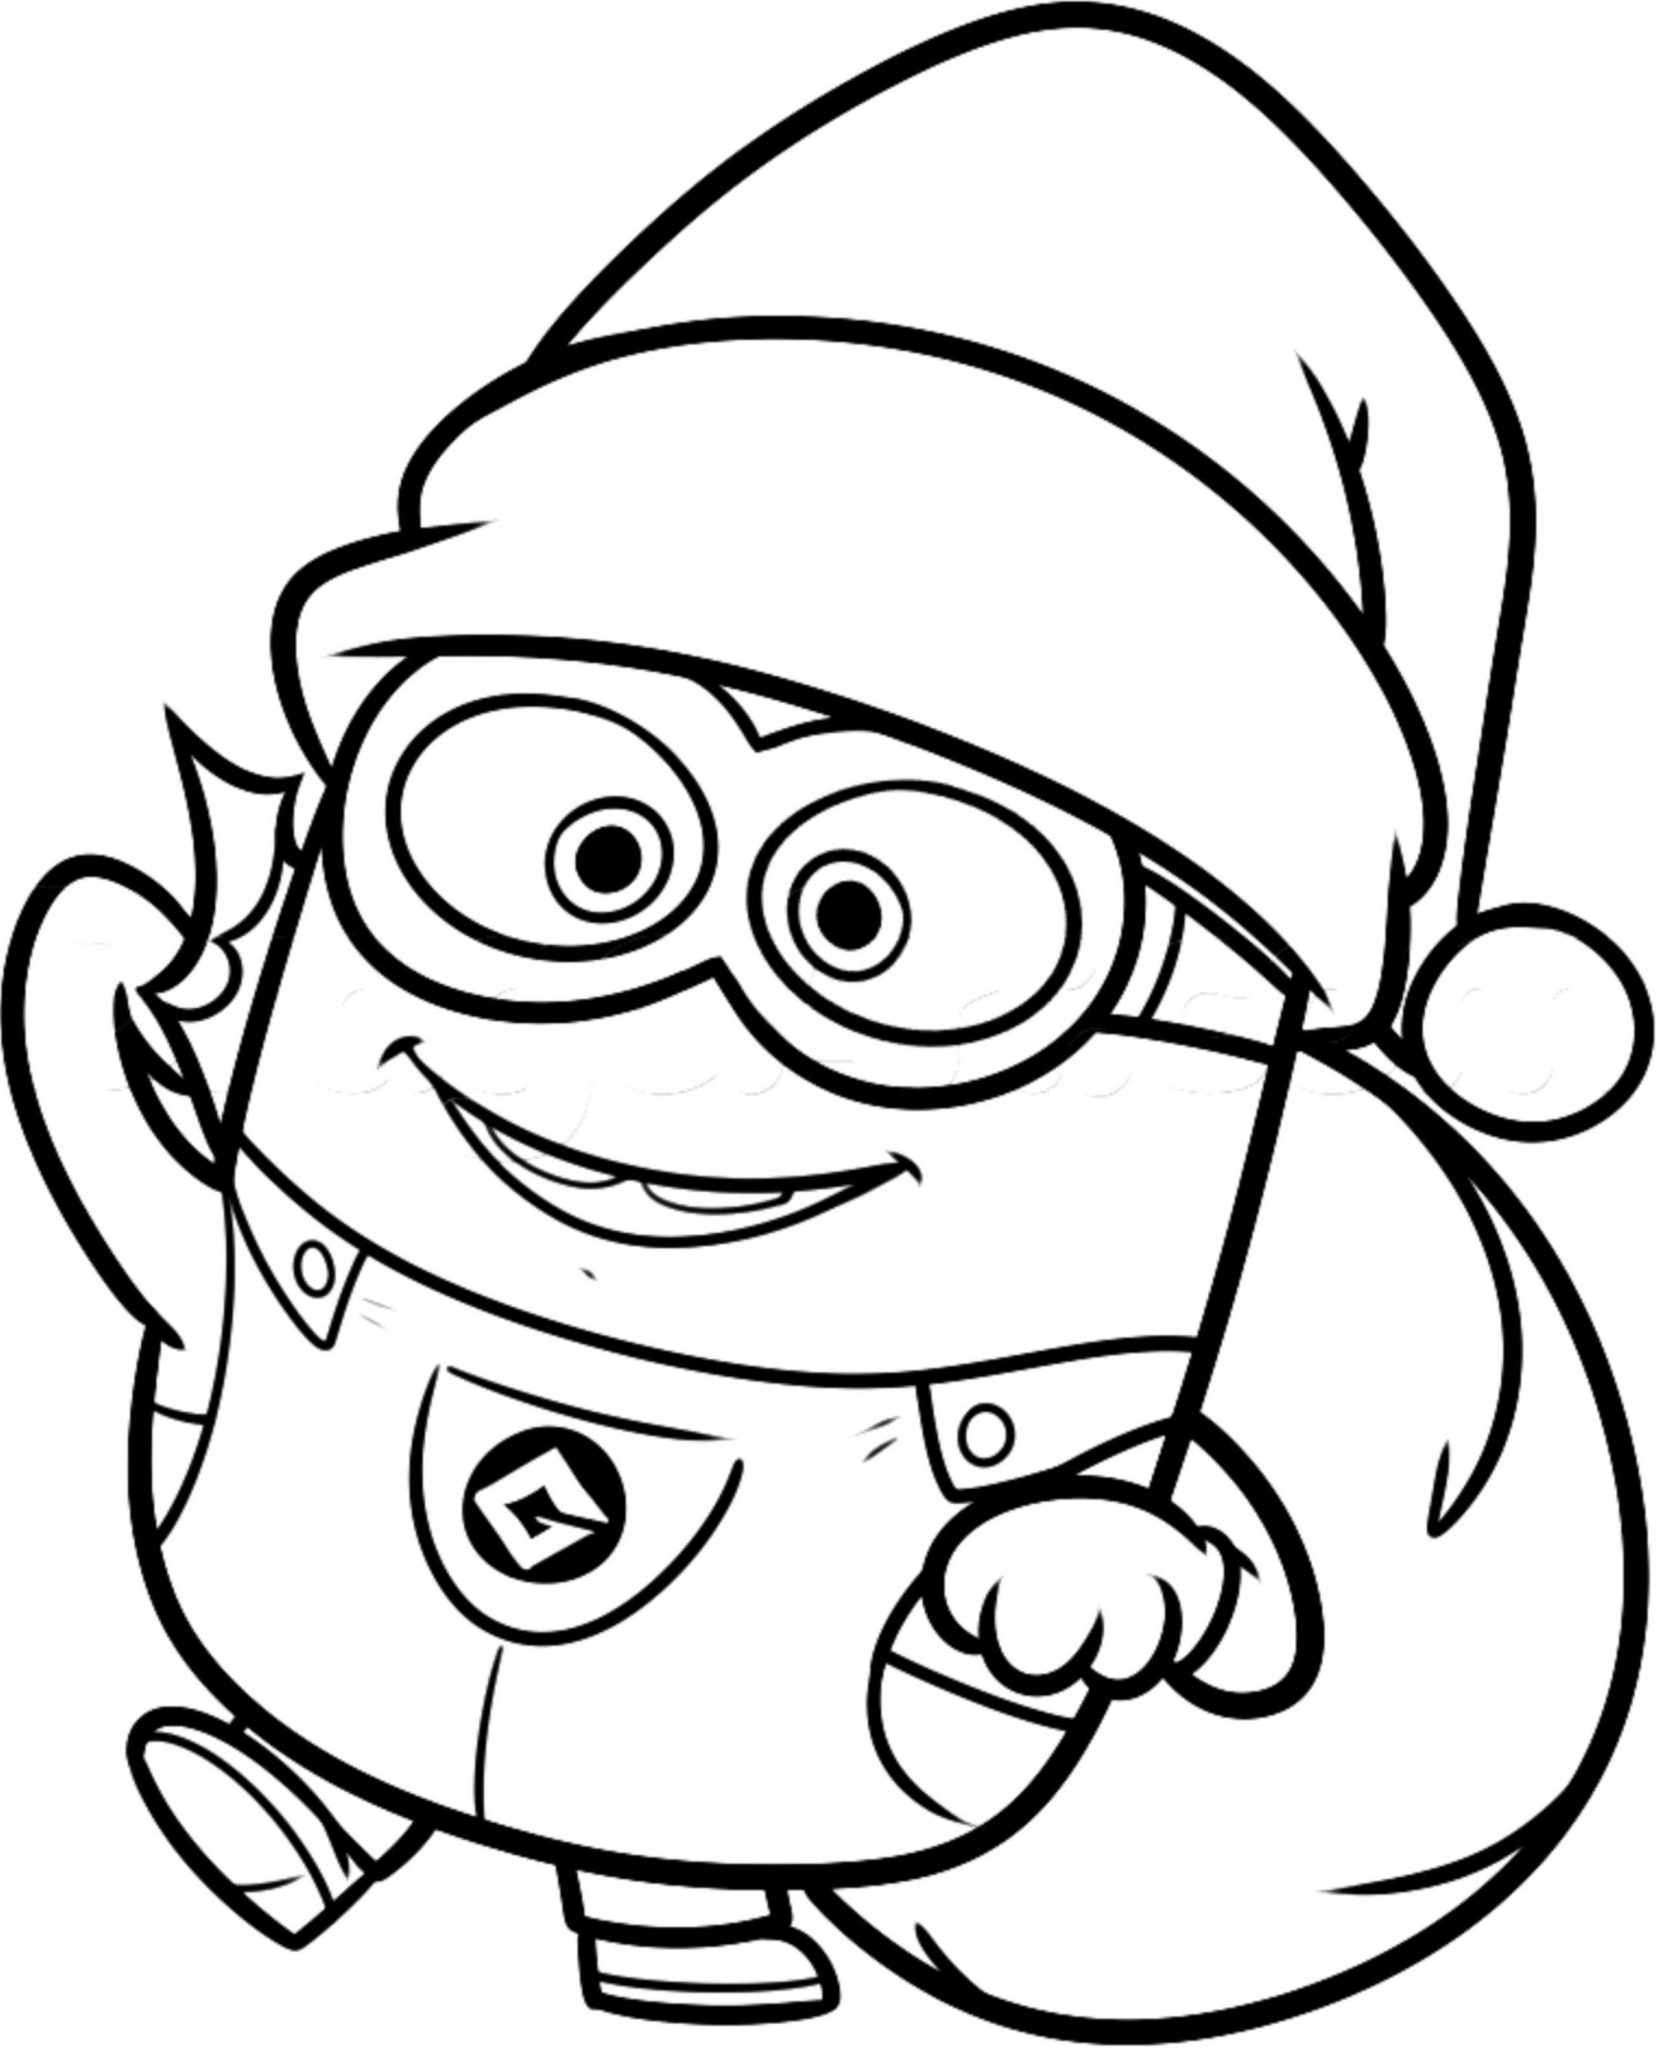 Print Download Minion Coloring Pages for Kids to Have